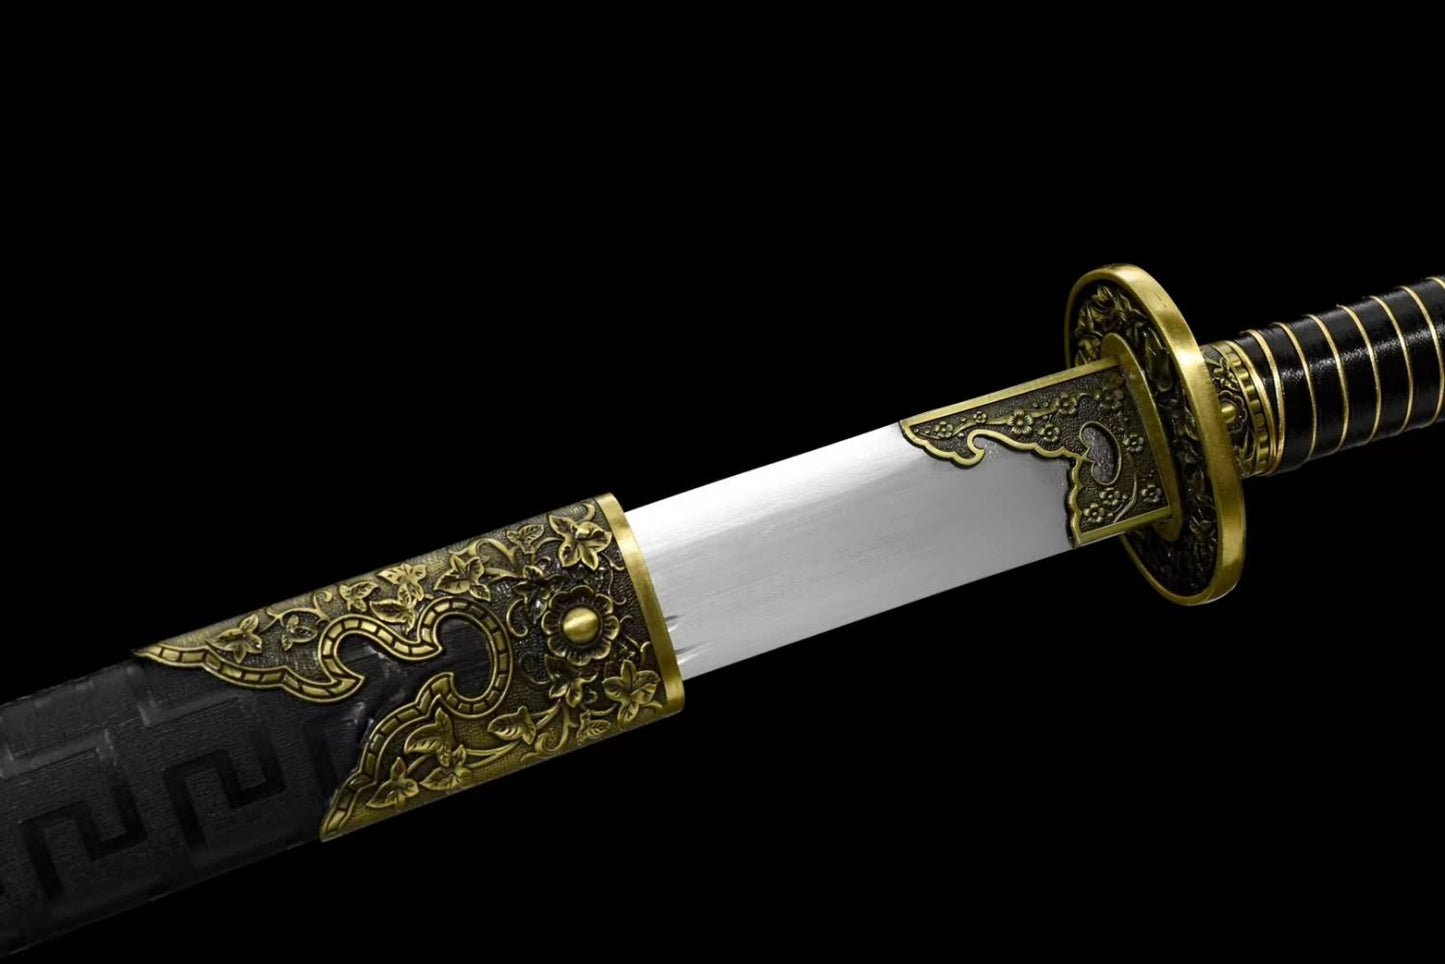 Yan ling dao with Forged High Carbon Steel Blade-PU Wood Scabbard and Alloy Fittings